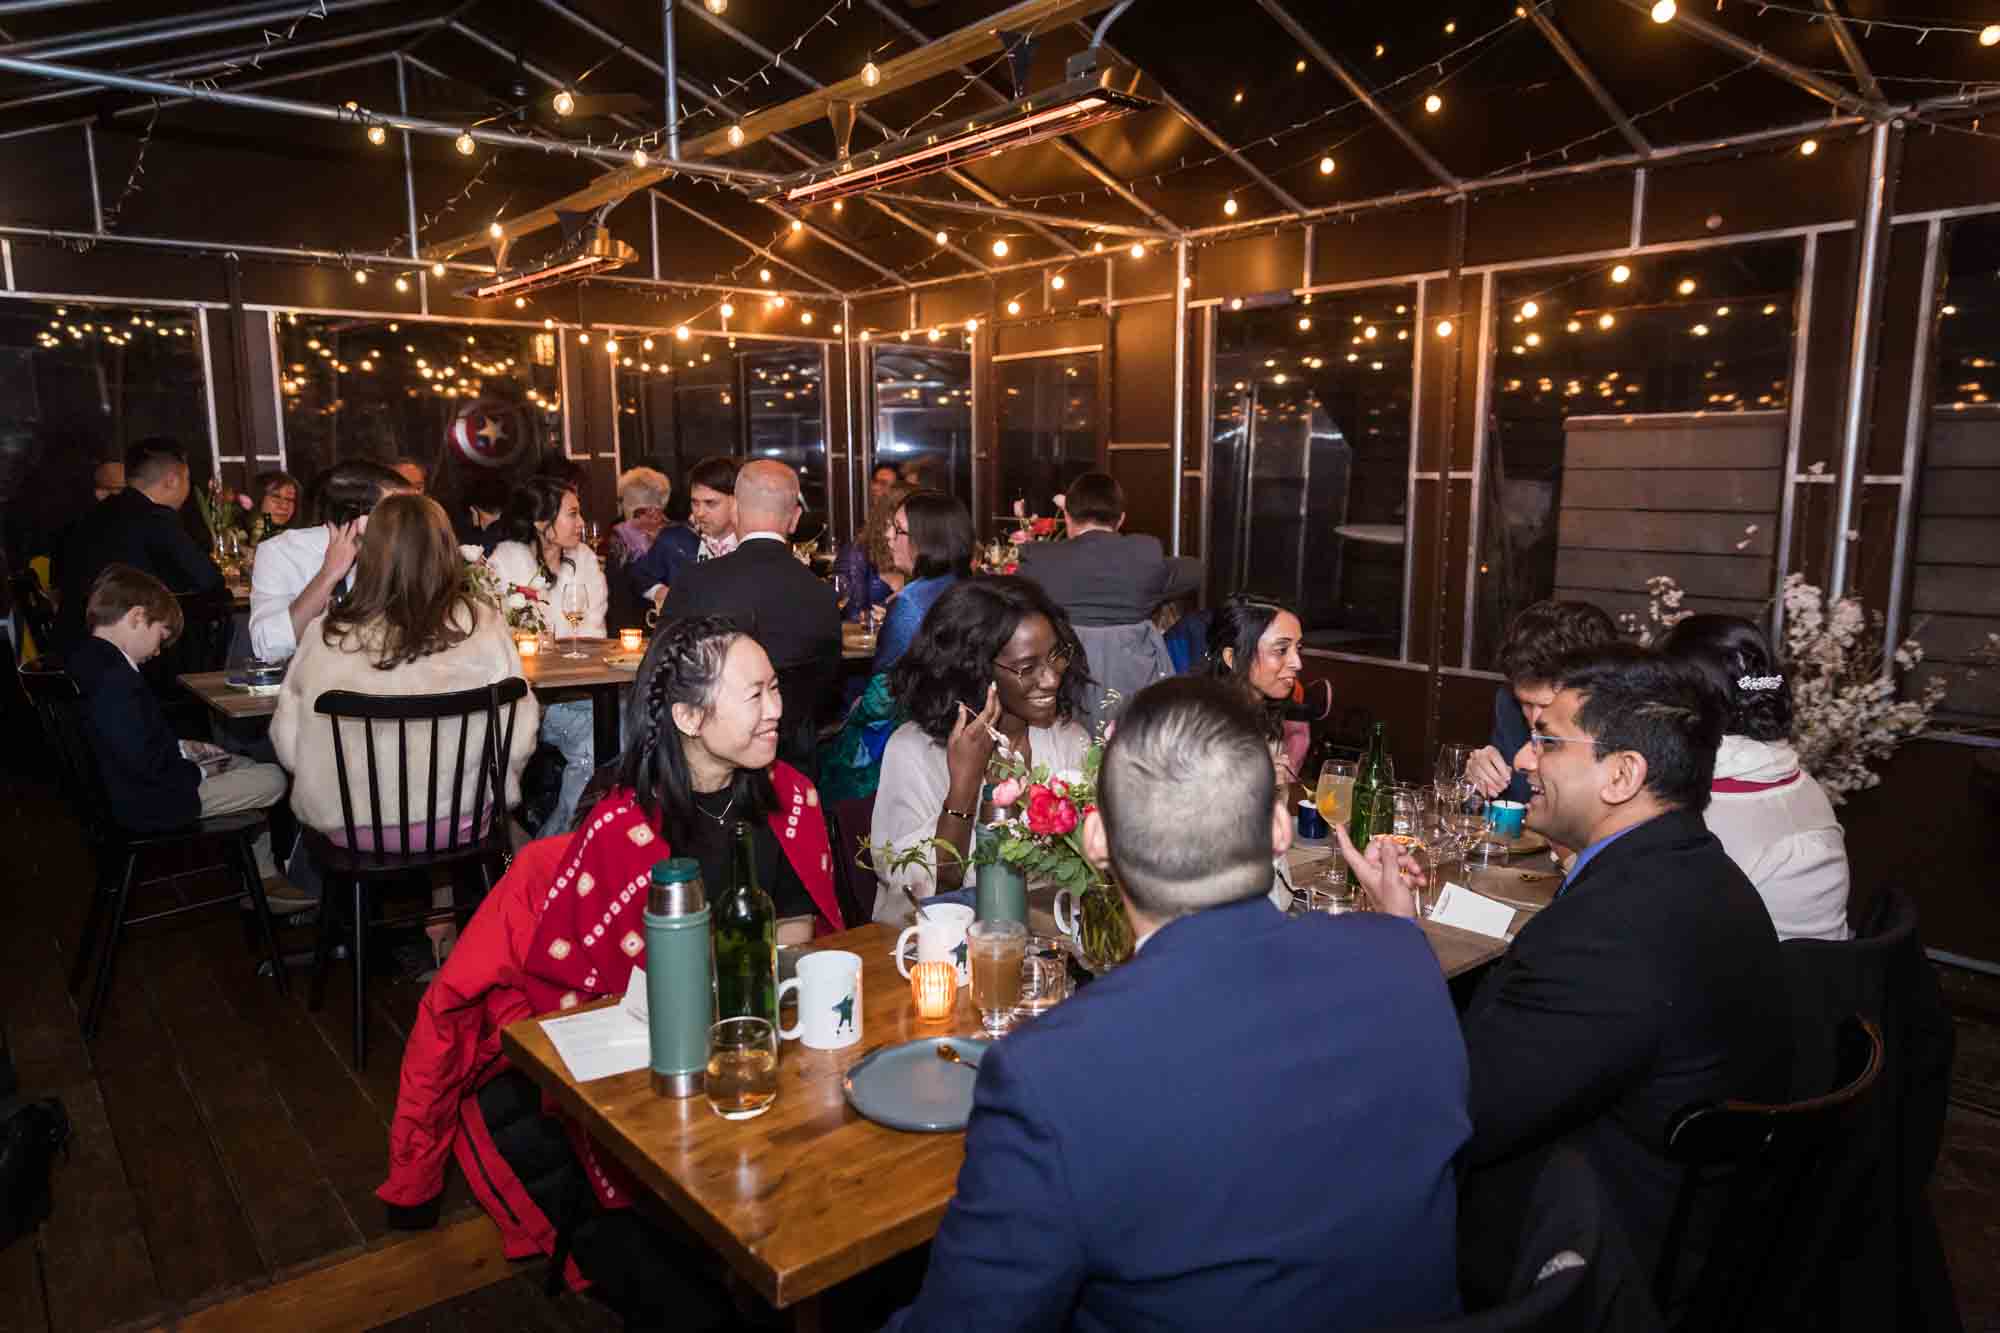 Guests seated at a Brooklyn restaurant wedding